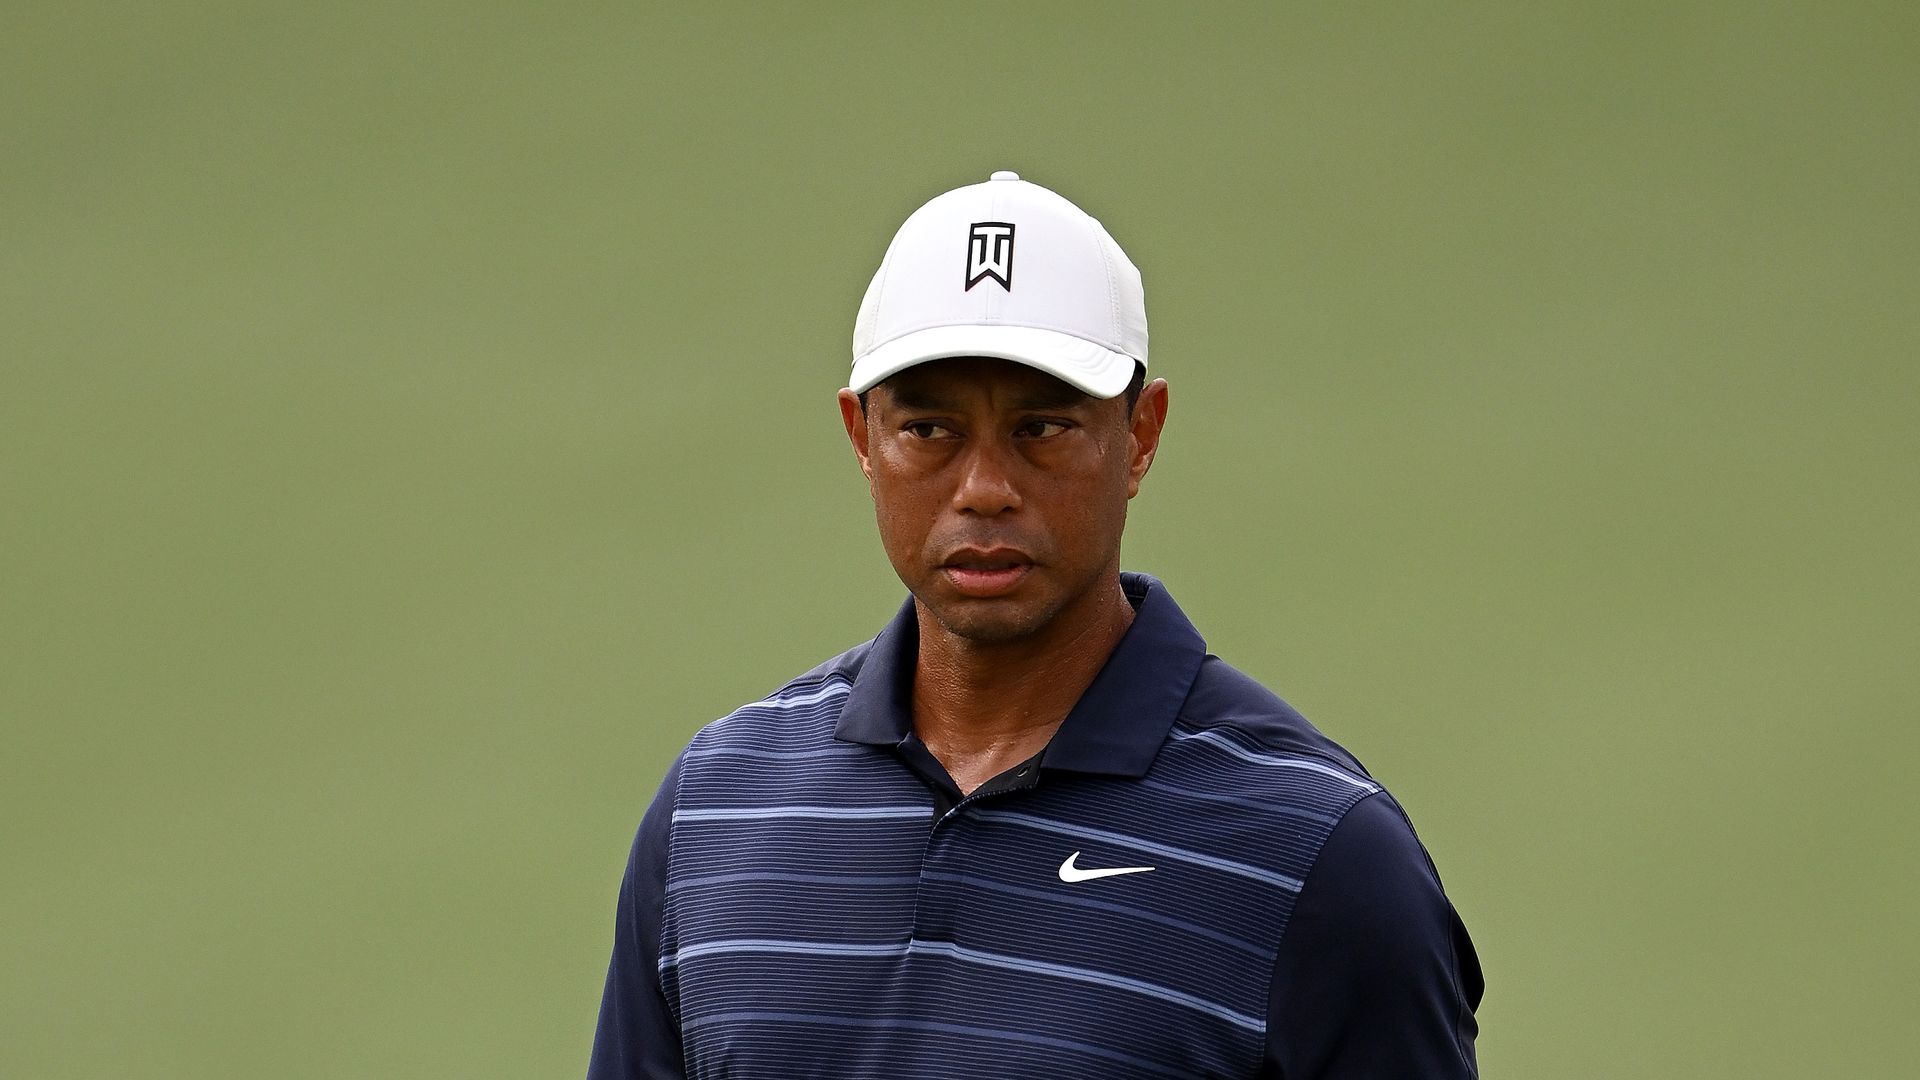 Tiger Woods undergoes surgery for car crash related injuries, 'no timetable' on return to golf